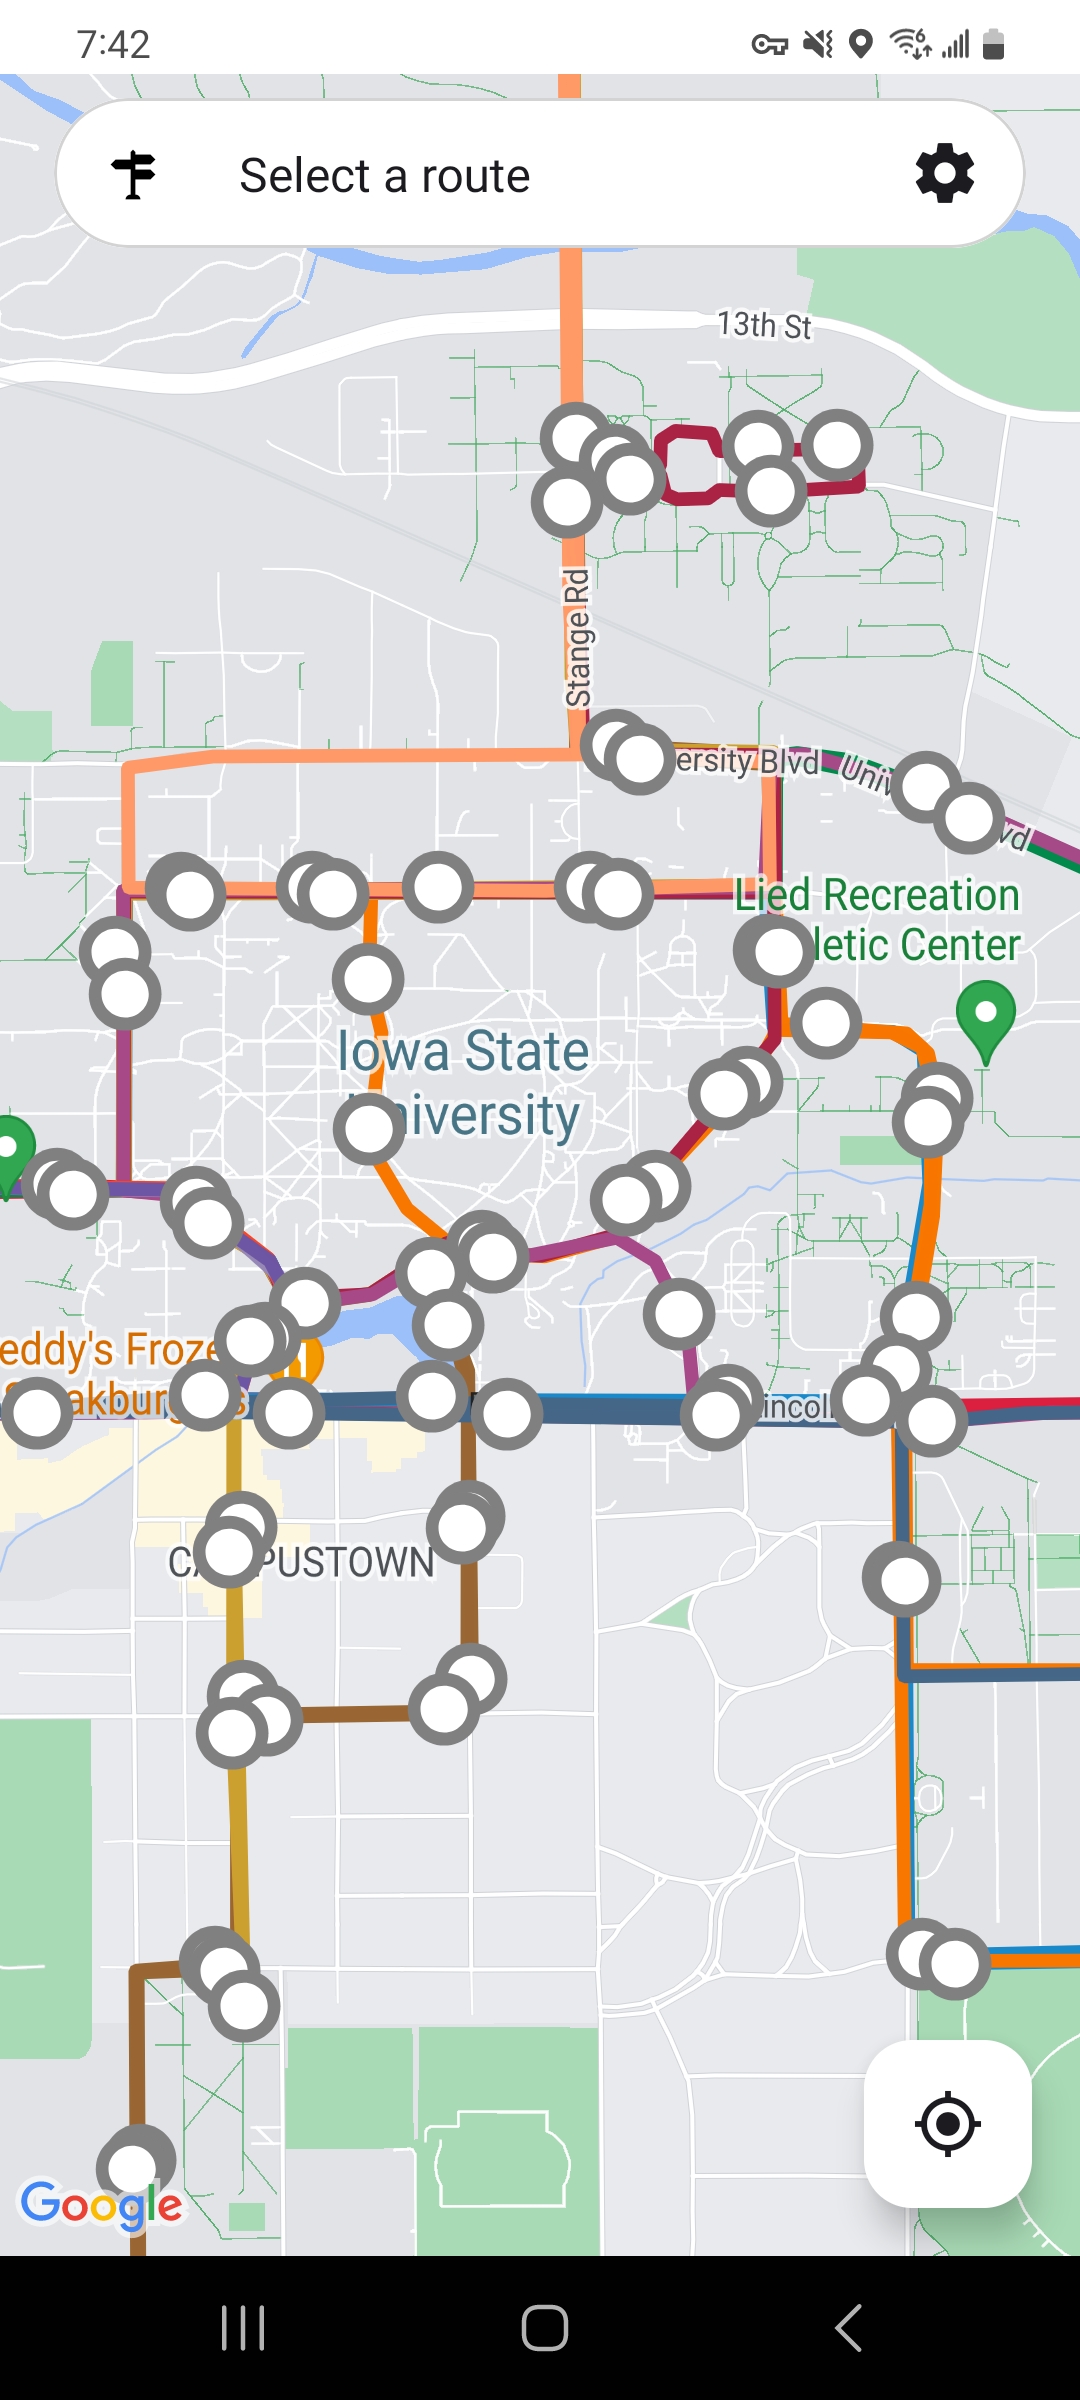 View all routes/stops